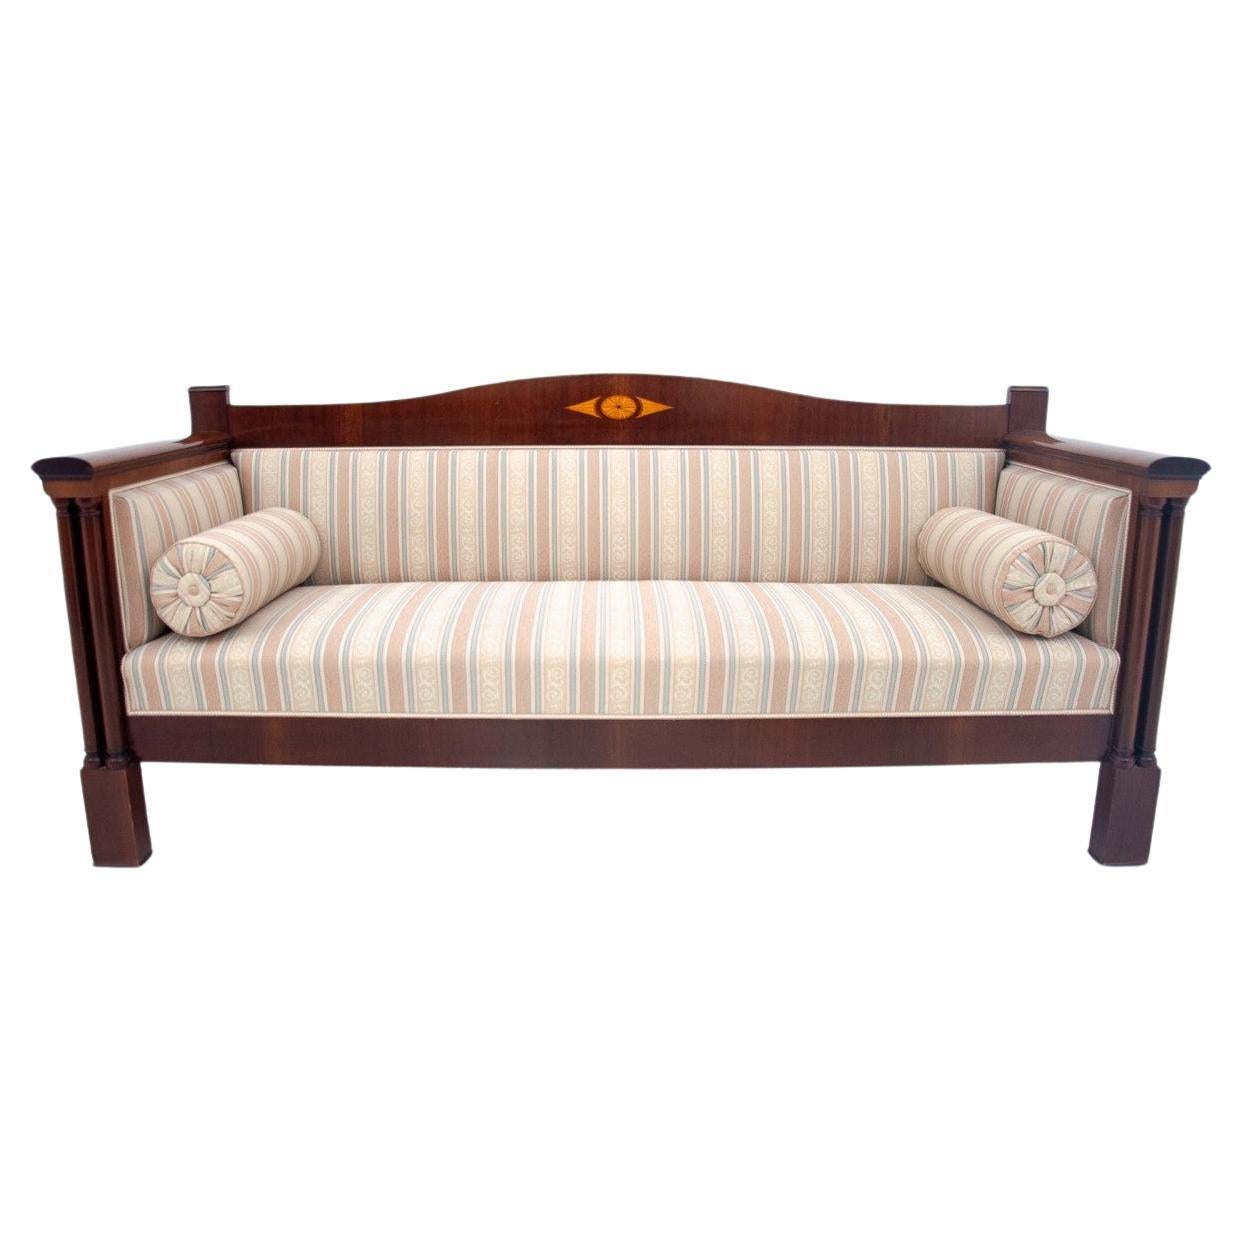 Antique sofa from the mid-19th century, Northern Europe. For Sale